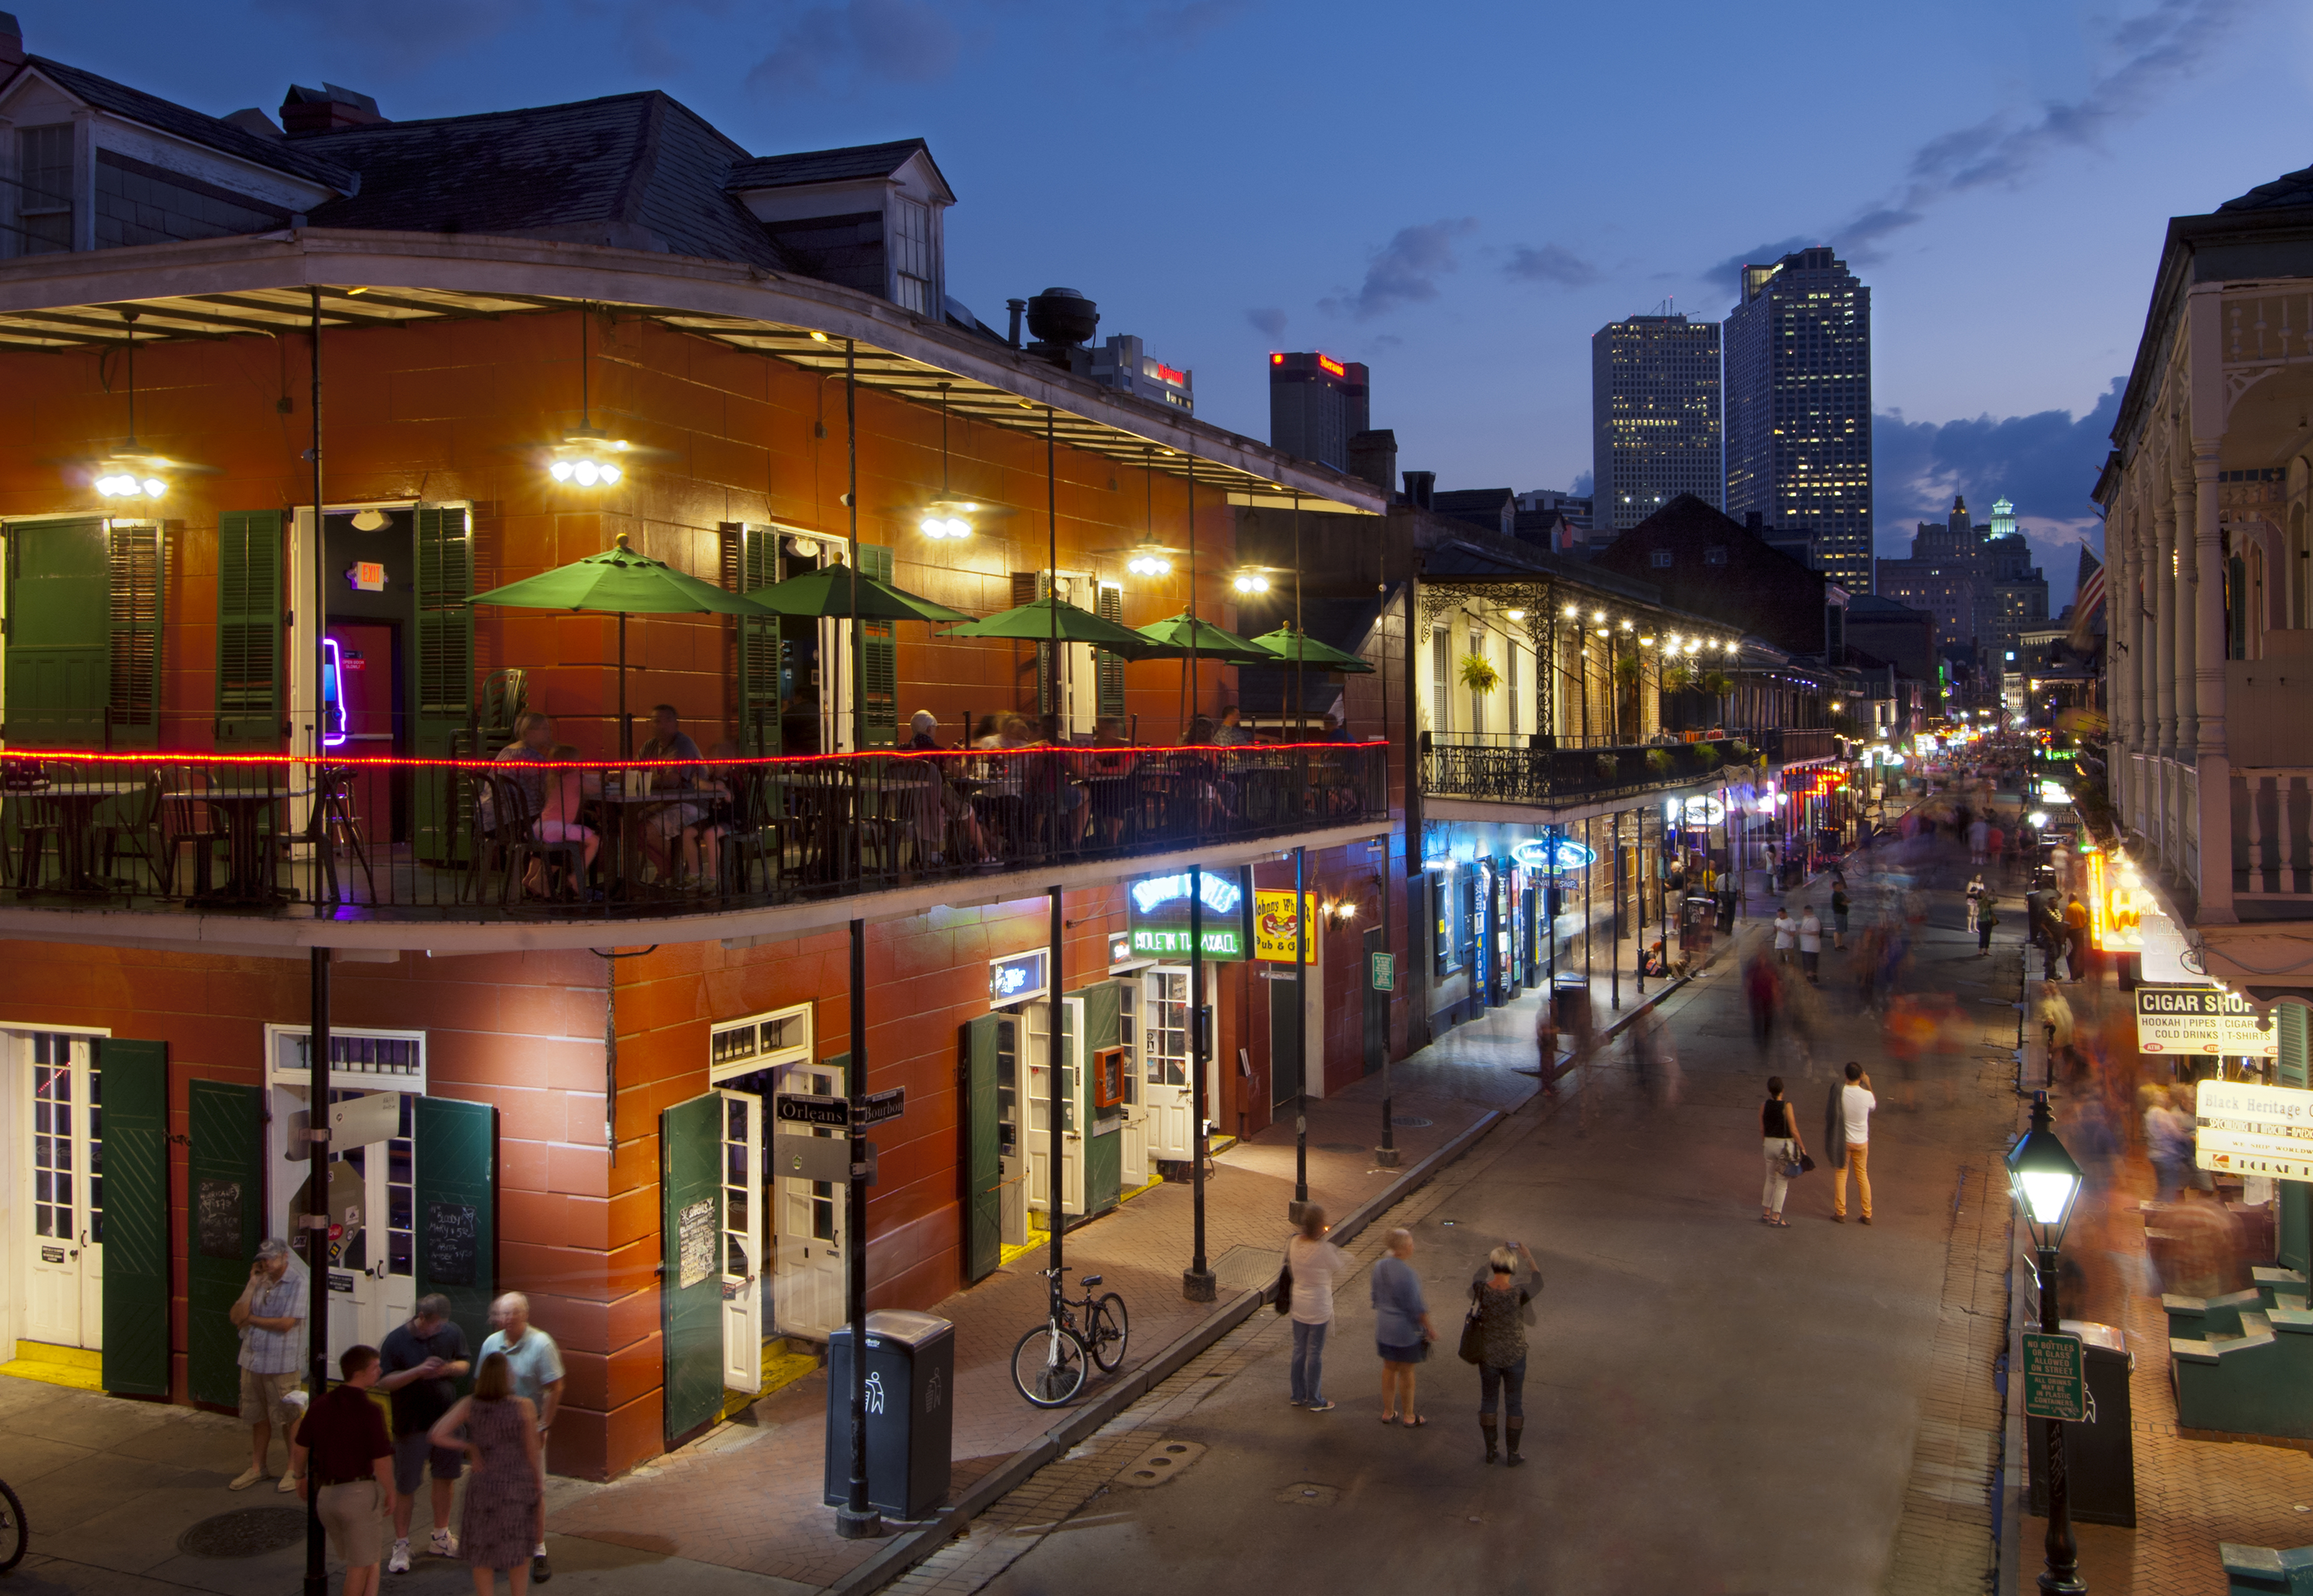 Bourbon Street in New Orleans at dusk, busy with pedestrians and illuminated buildings